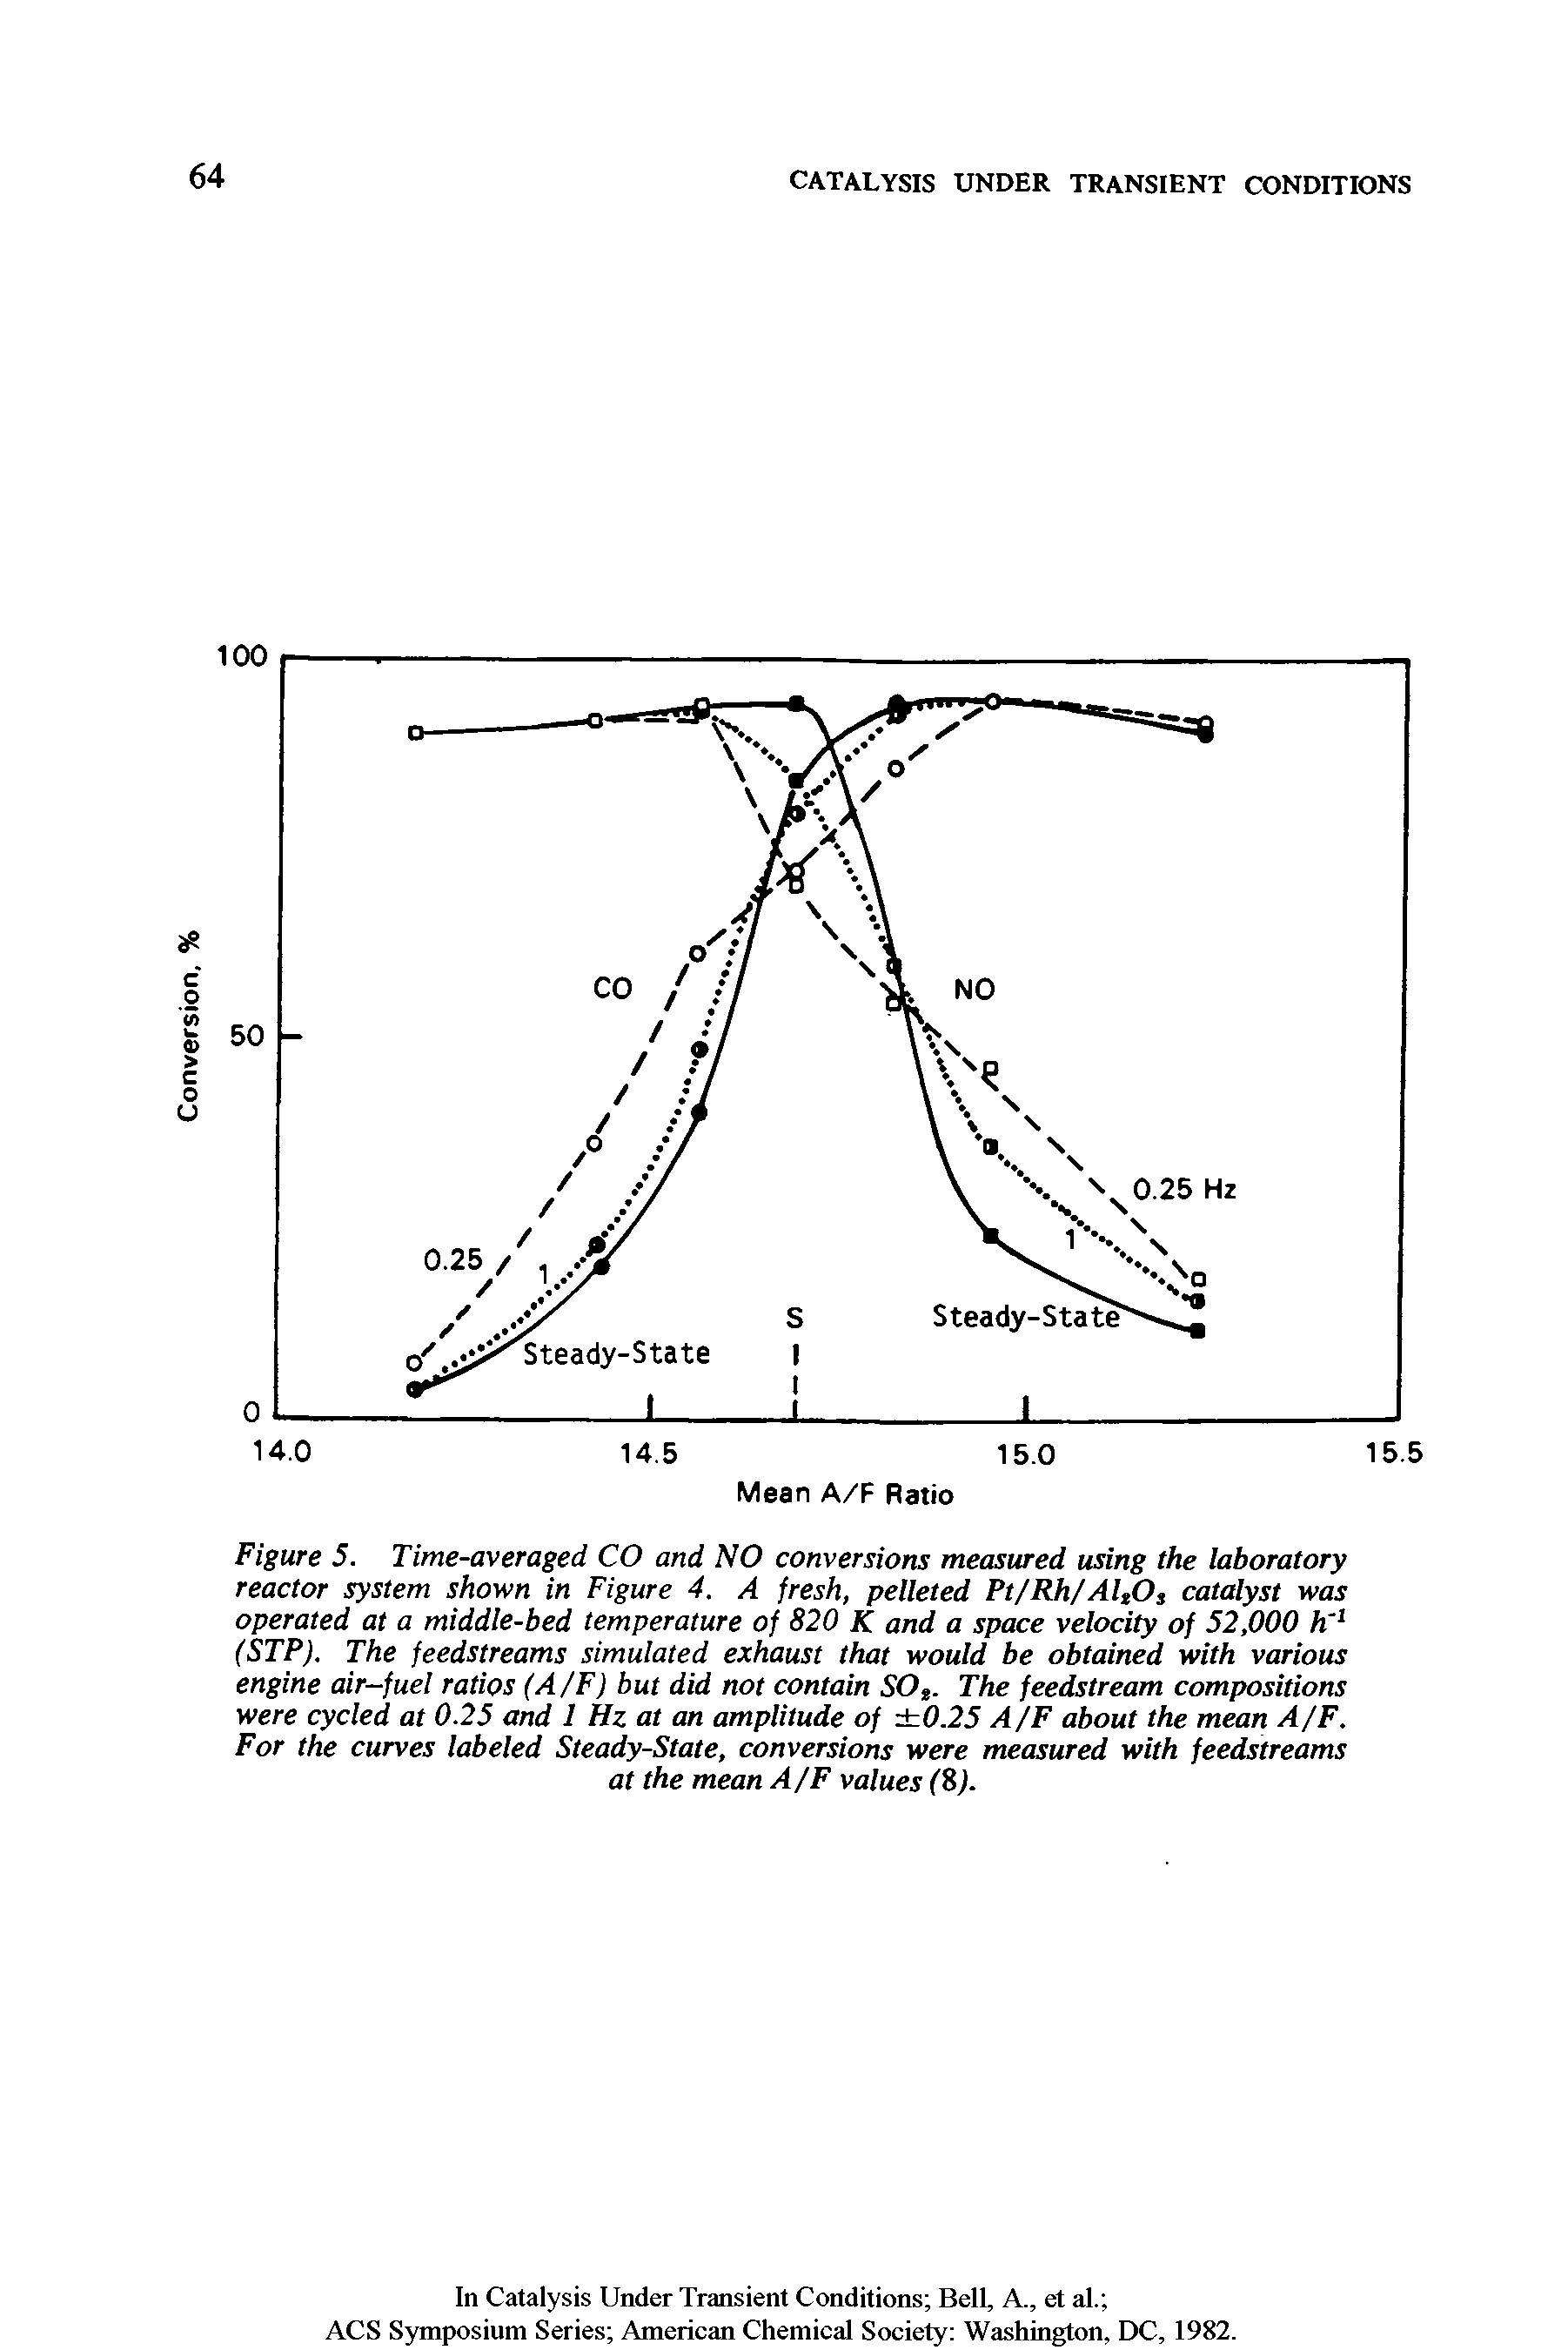 Figure 5. Time-averaged CO and NO conversions measured using the laboratory reactor system shown in Figure 4. A fresh, pelleted Pt/Rh/AltOs catalyst was operated at a middle-bed temperature of 820 K and a space velocity of 52,000 h 1 (STP). The feedstreams simulated exhaust that would be obtained with various engine air-fuel ratios (A/F) but did not contain SOs. The feedstream compositions were cycled at 0.25 and 1 Hz at an amplitude of 0.25 A/F about the mean A/F. For the curves labeled Steady-State, conversions were measured with feedstreams at the mean A/F values (8).